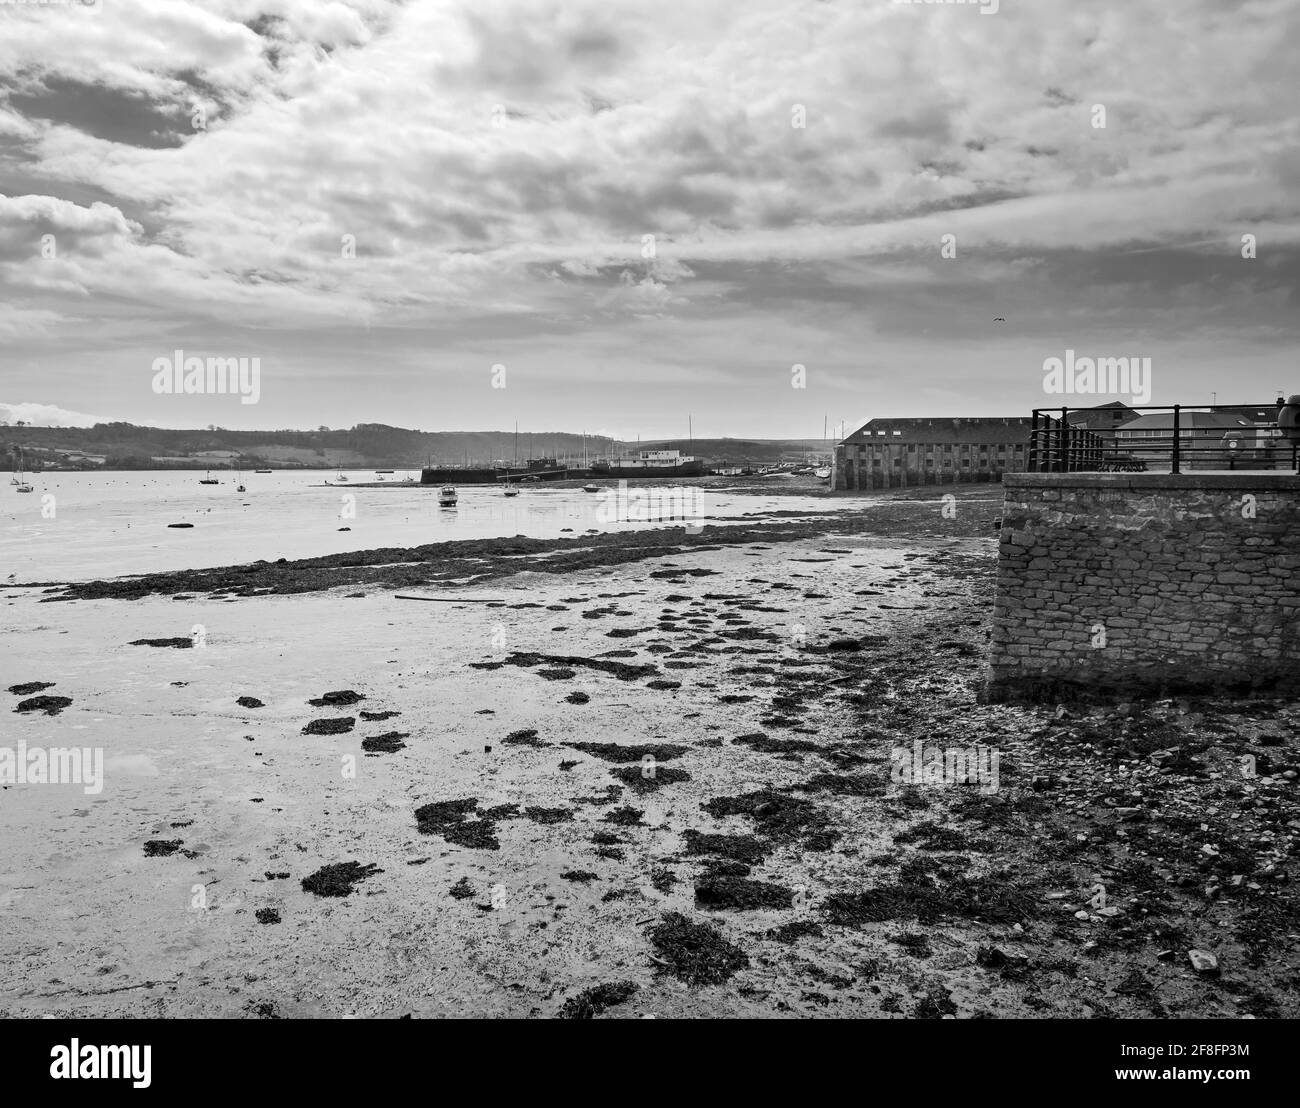 Tides Out. The riverside at Torpoint in south east Cornwall, with boats berthed on the harbour wall. In the distance Mount Edgcumbe. Black and White i Stock Photo